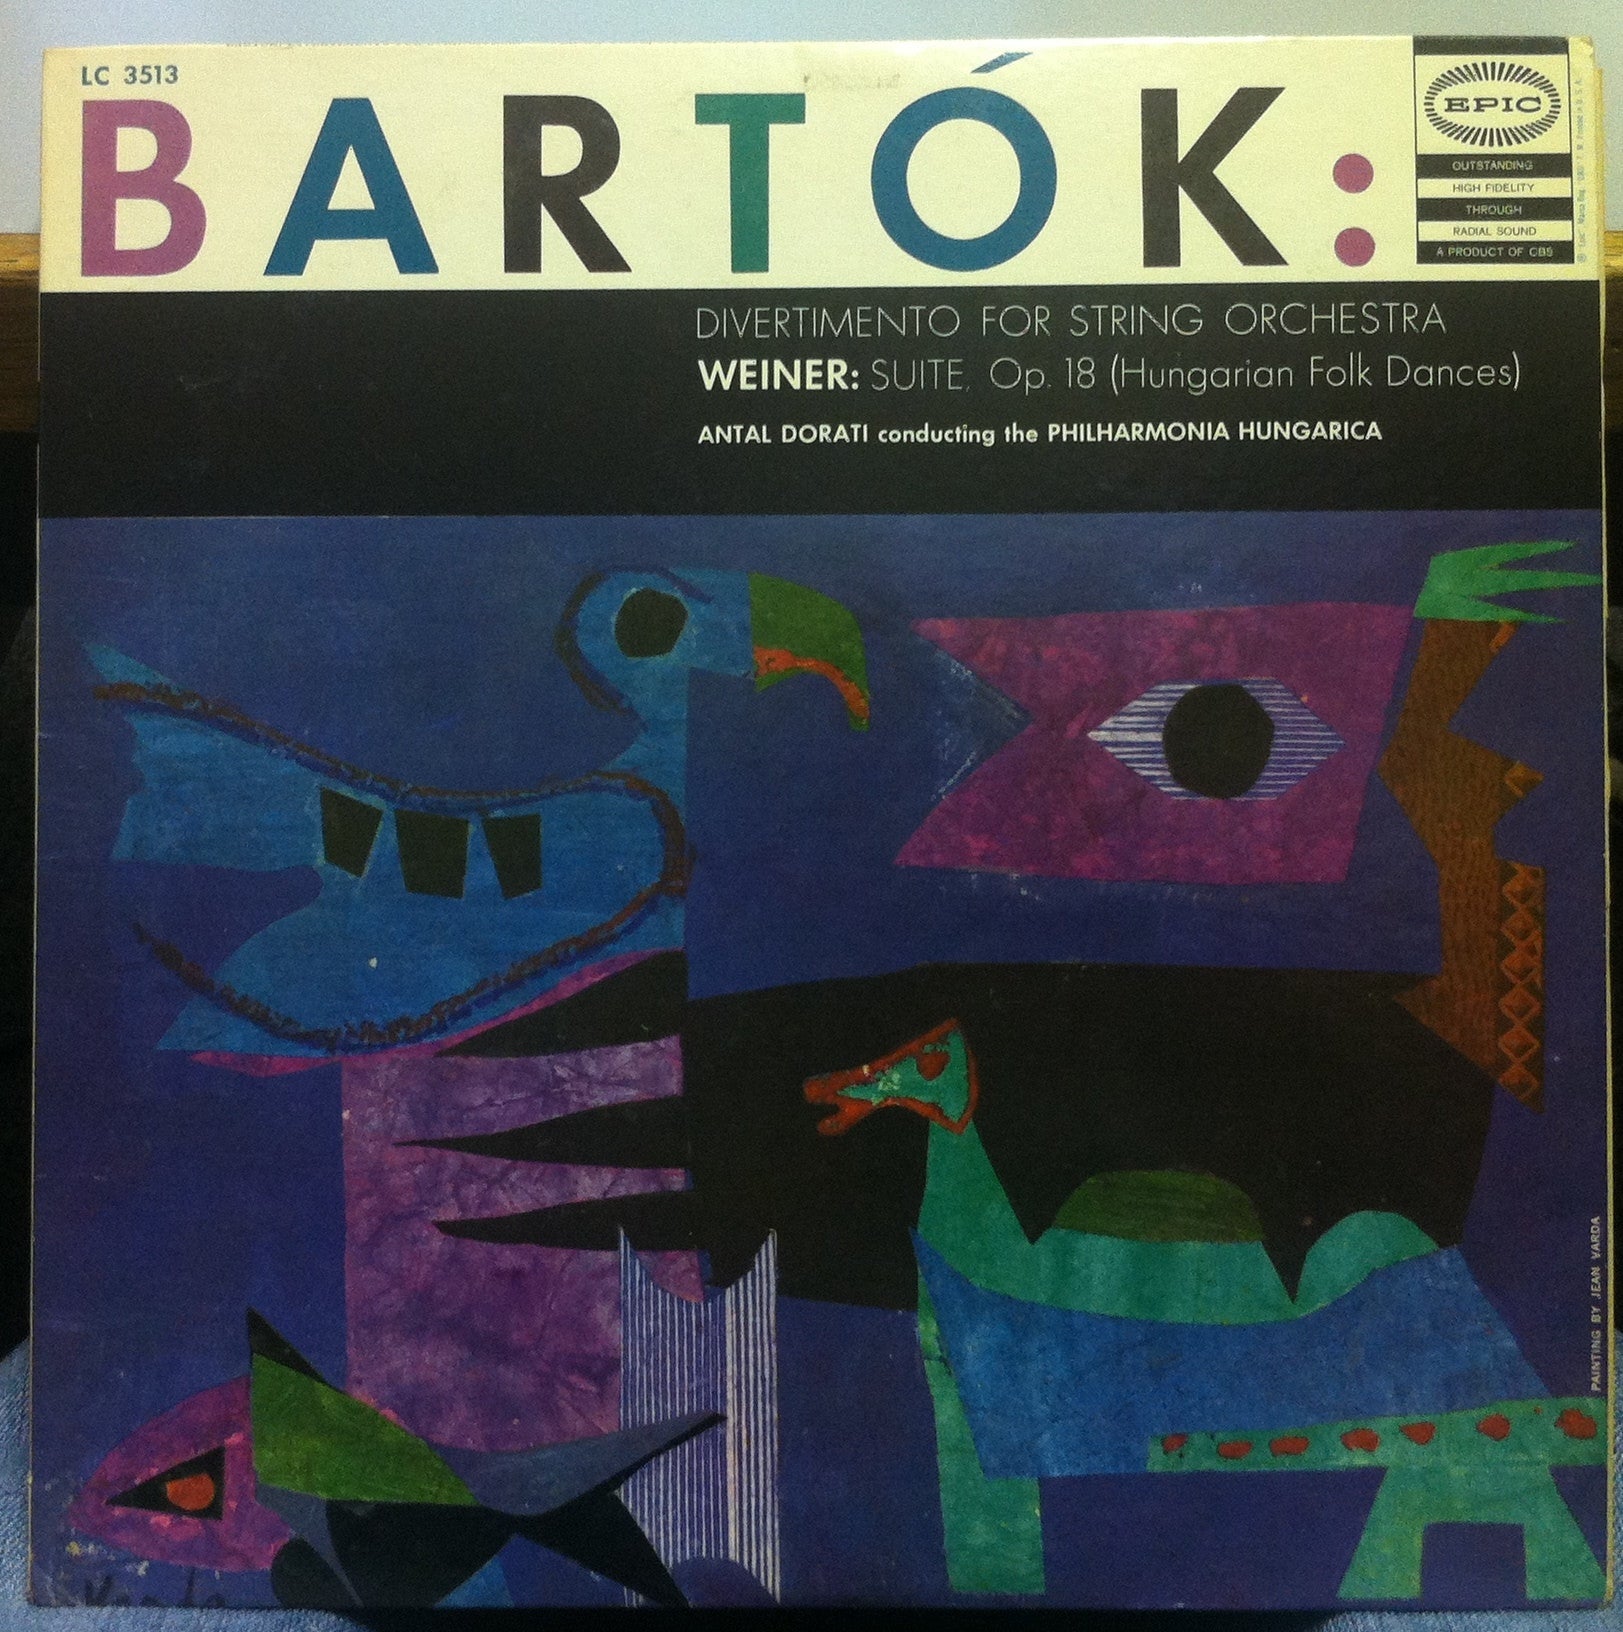 Antal Dorati Conducting The Philharmonia Hungaria - Bartok: Divertimento For String Orchestra / Weiner: Suite, Op. 18 (Hungarian Folk Dances) VG+ - Epic Mono USA - Classical